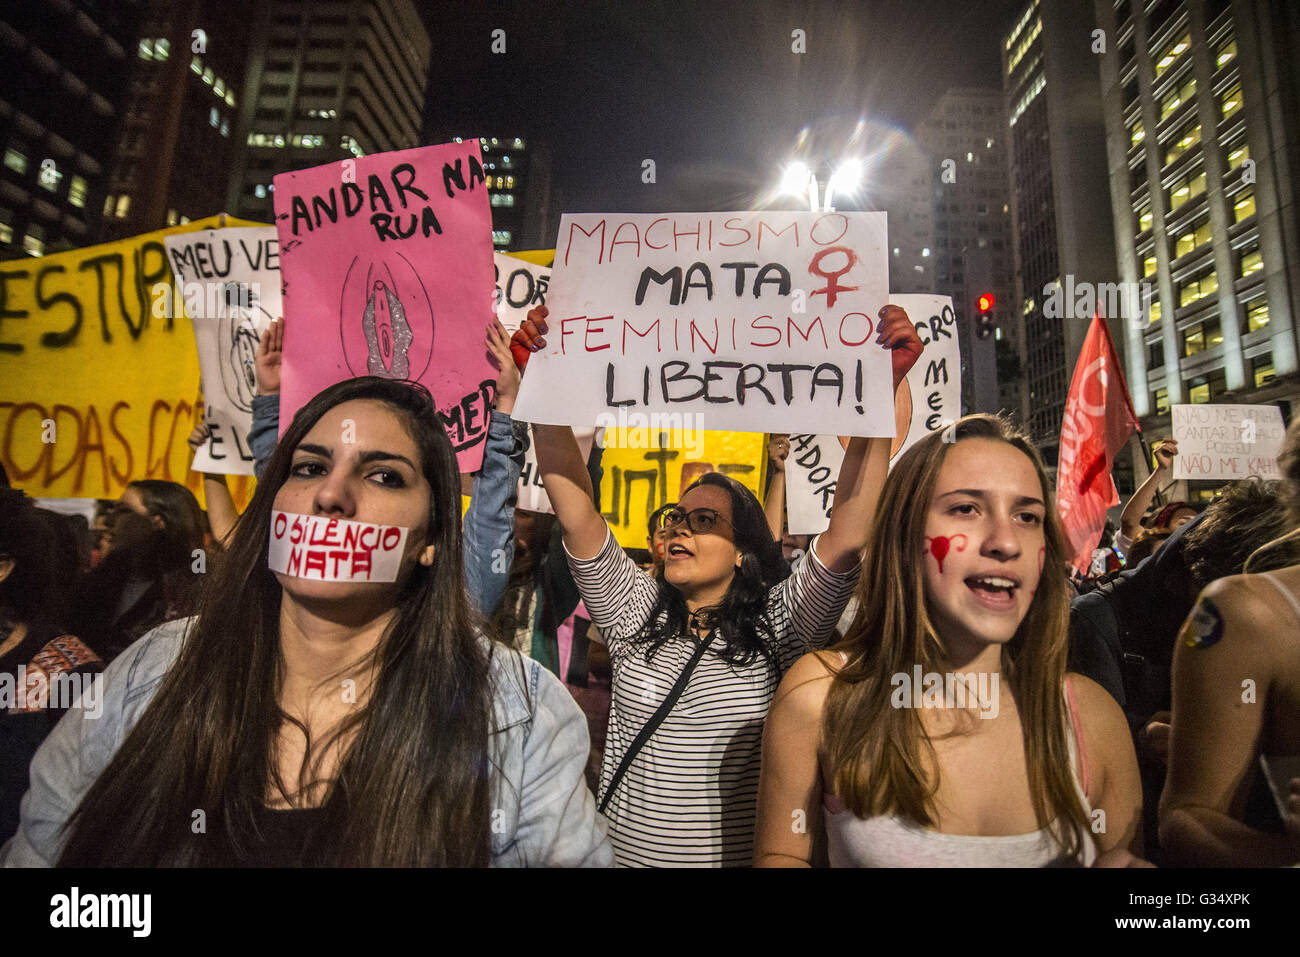 sao-paulo-brazil-8th-june-2016-women-march-during-a-protest-against-G34XPK.jpg